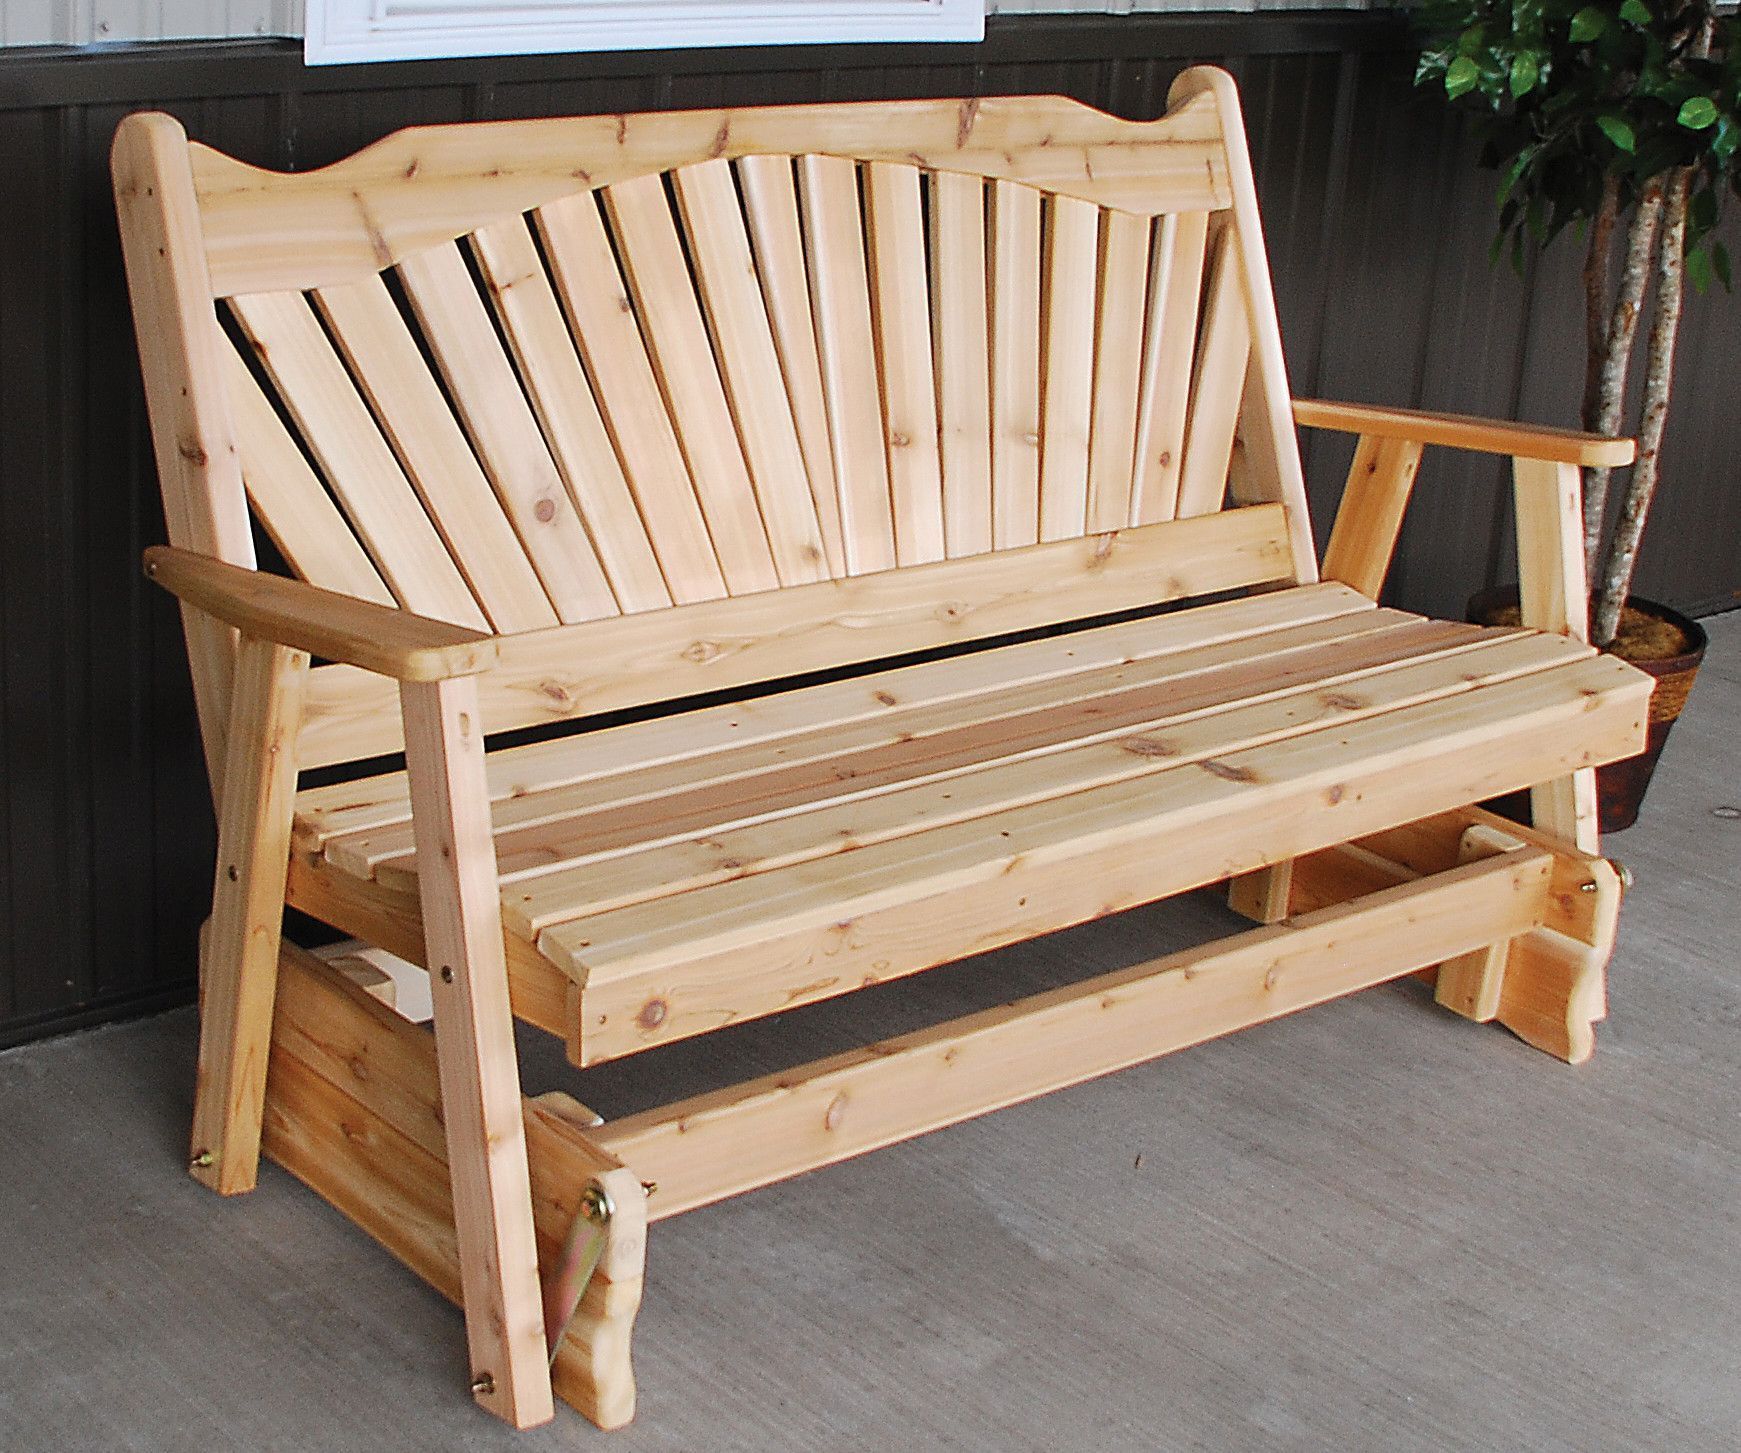 Fanback Glider Bench | Wooden Pallet Furniture, Outdoor In Fanback Glider Benches (Photo 1 of 25)